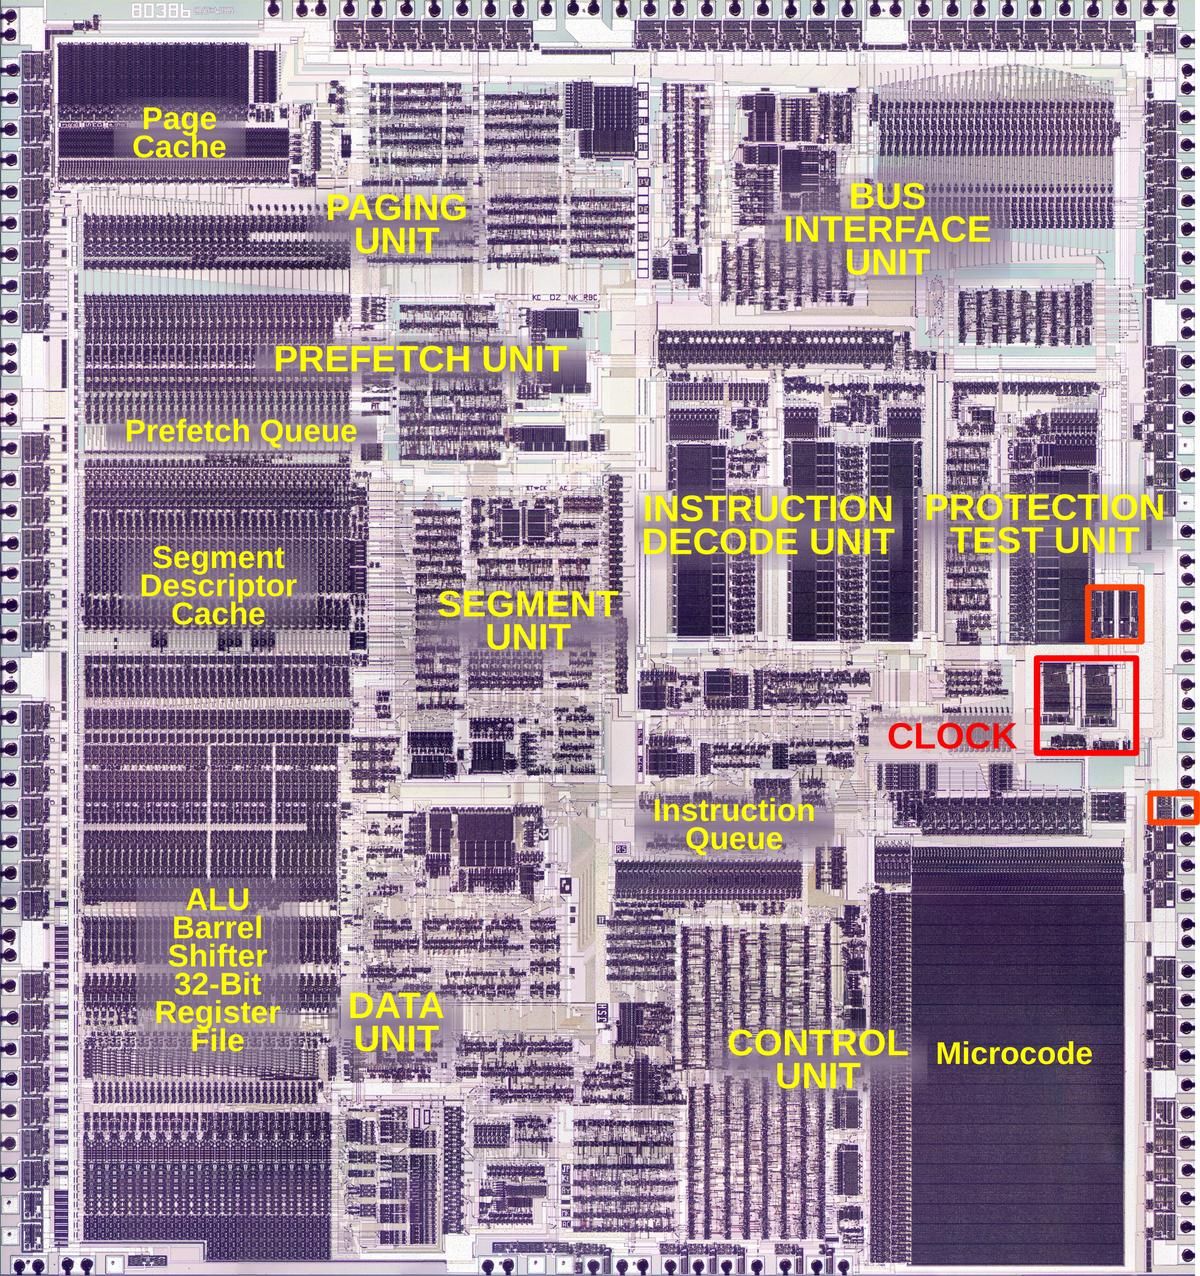 The 386 with the main functional blocks labeled. Click this image (or any other) for a larger version.